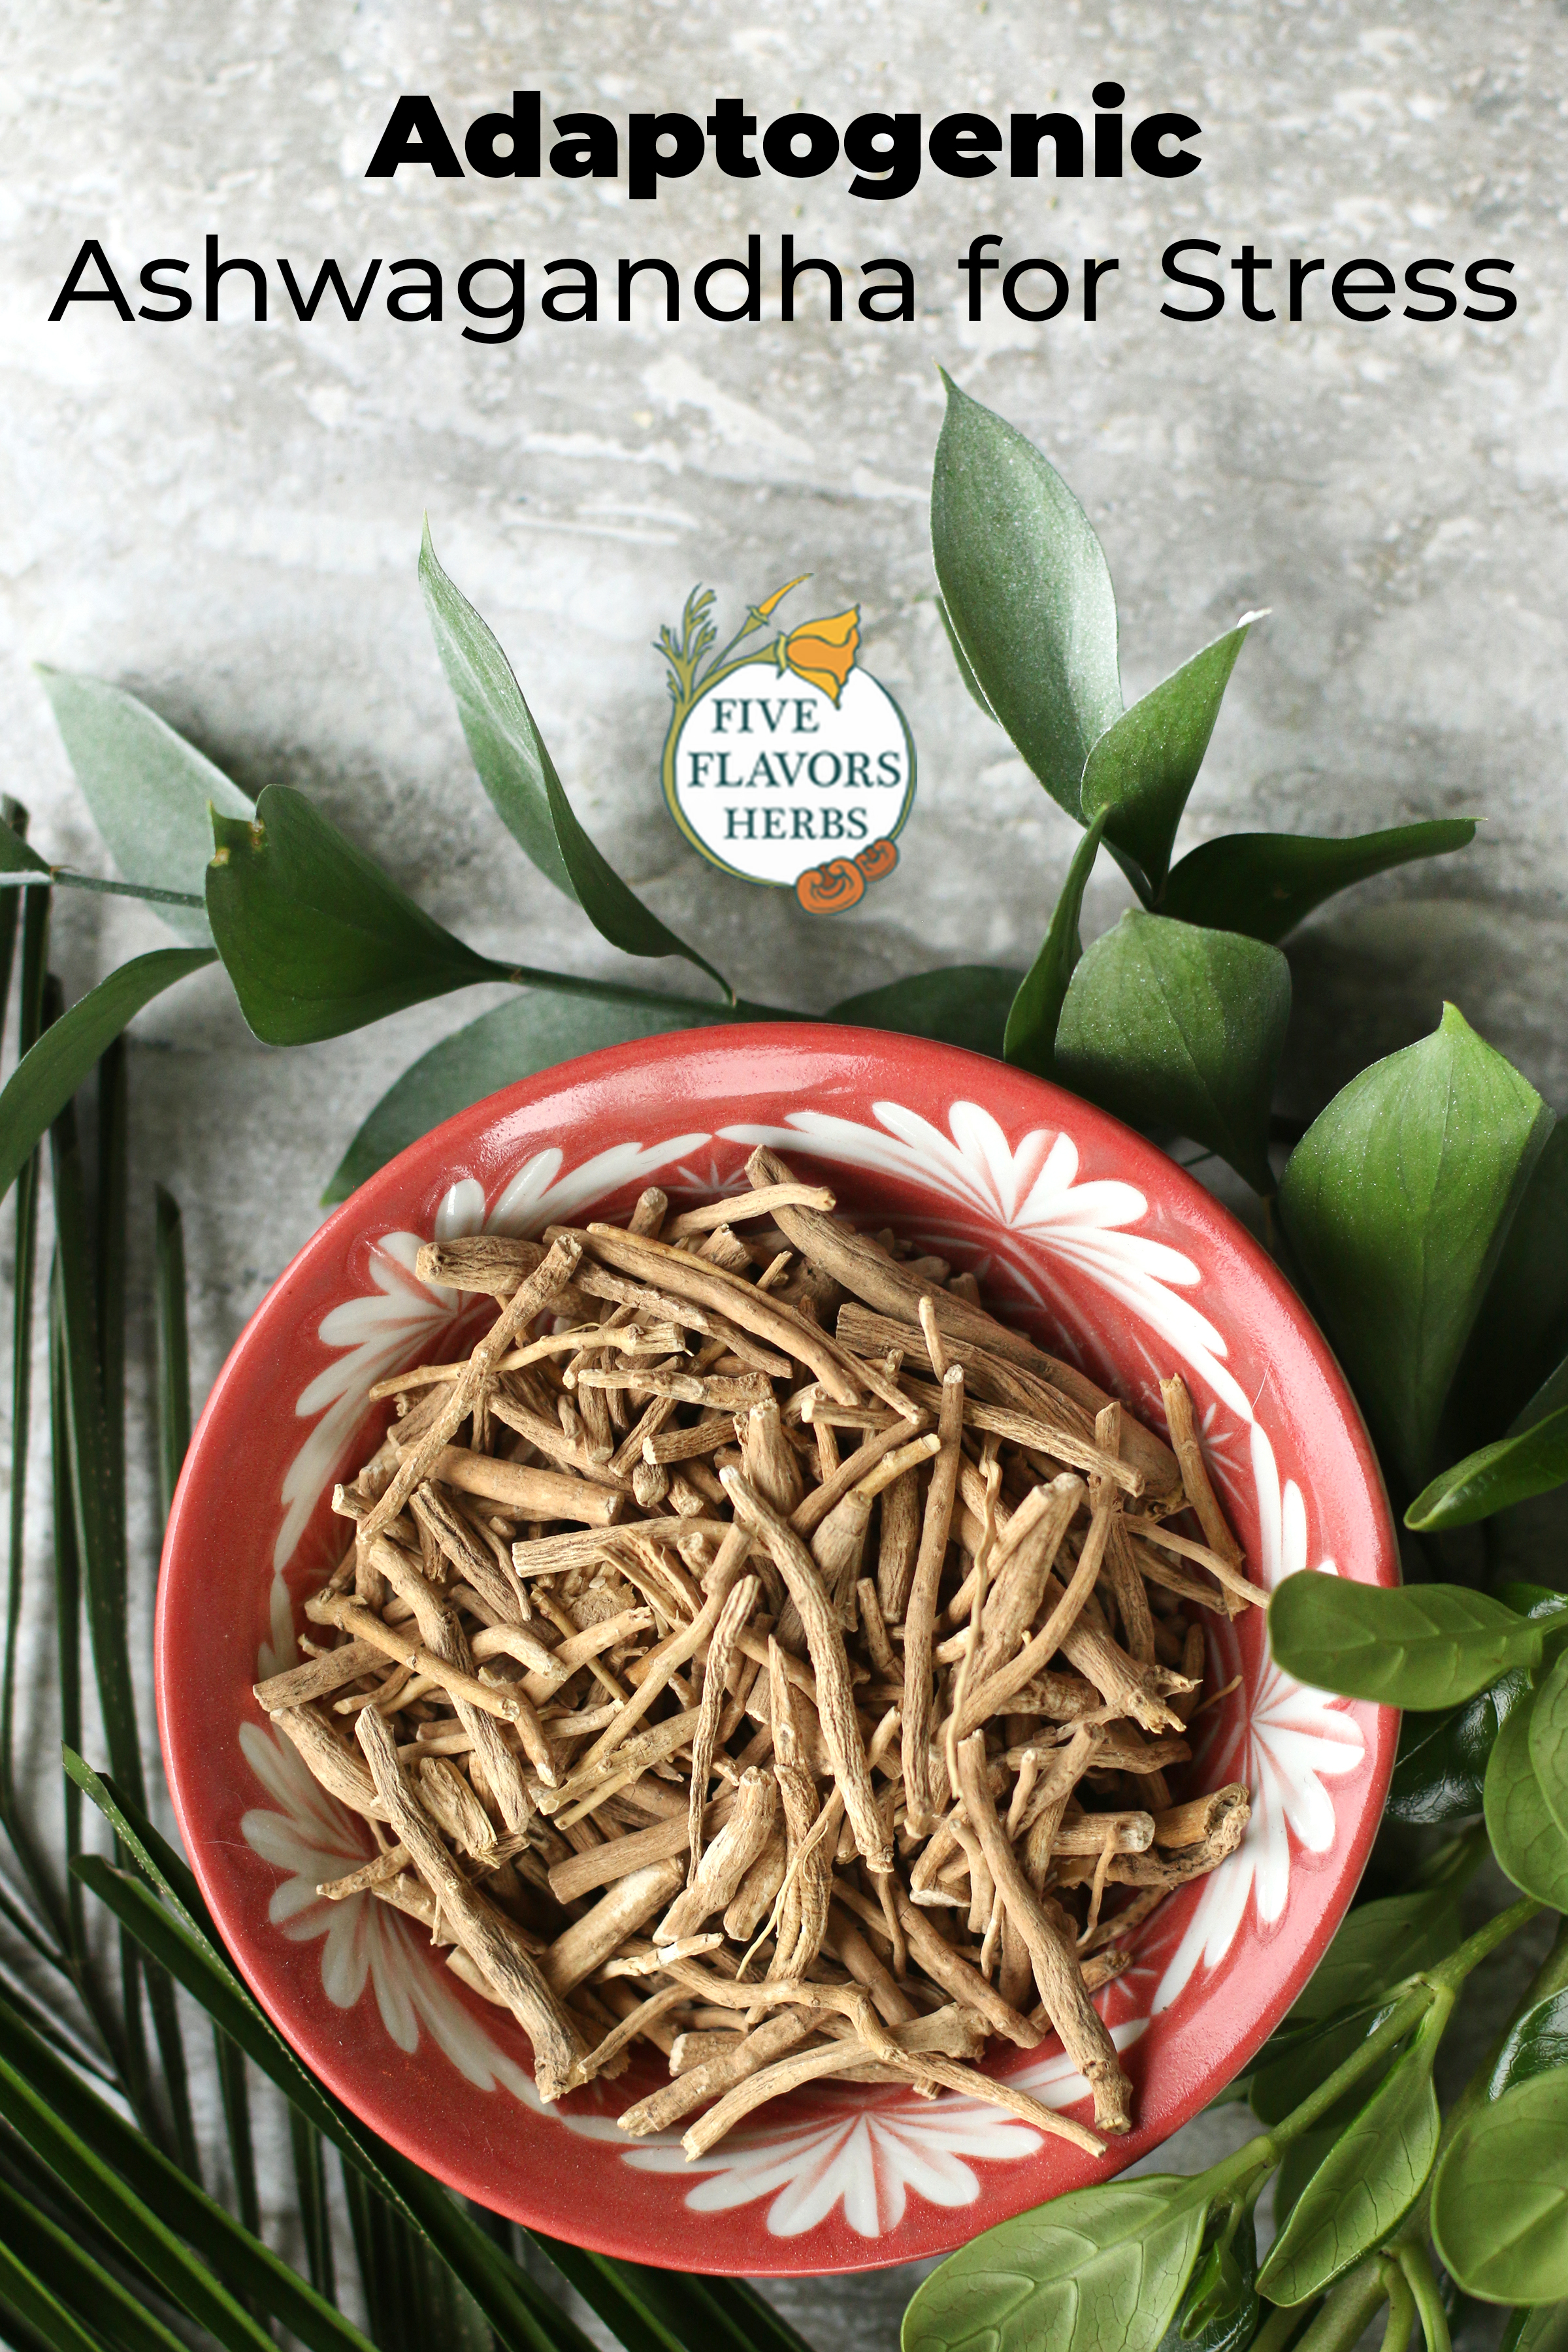 ashwagandha-benefits-pin-with-red-bowl-of-dried-ashwagandha-root-surrounded-by-leaves